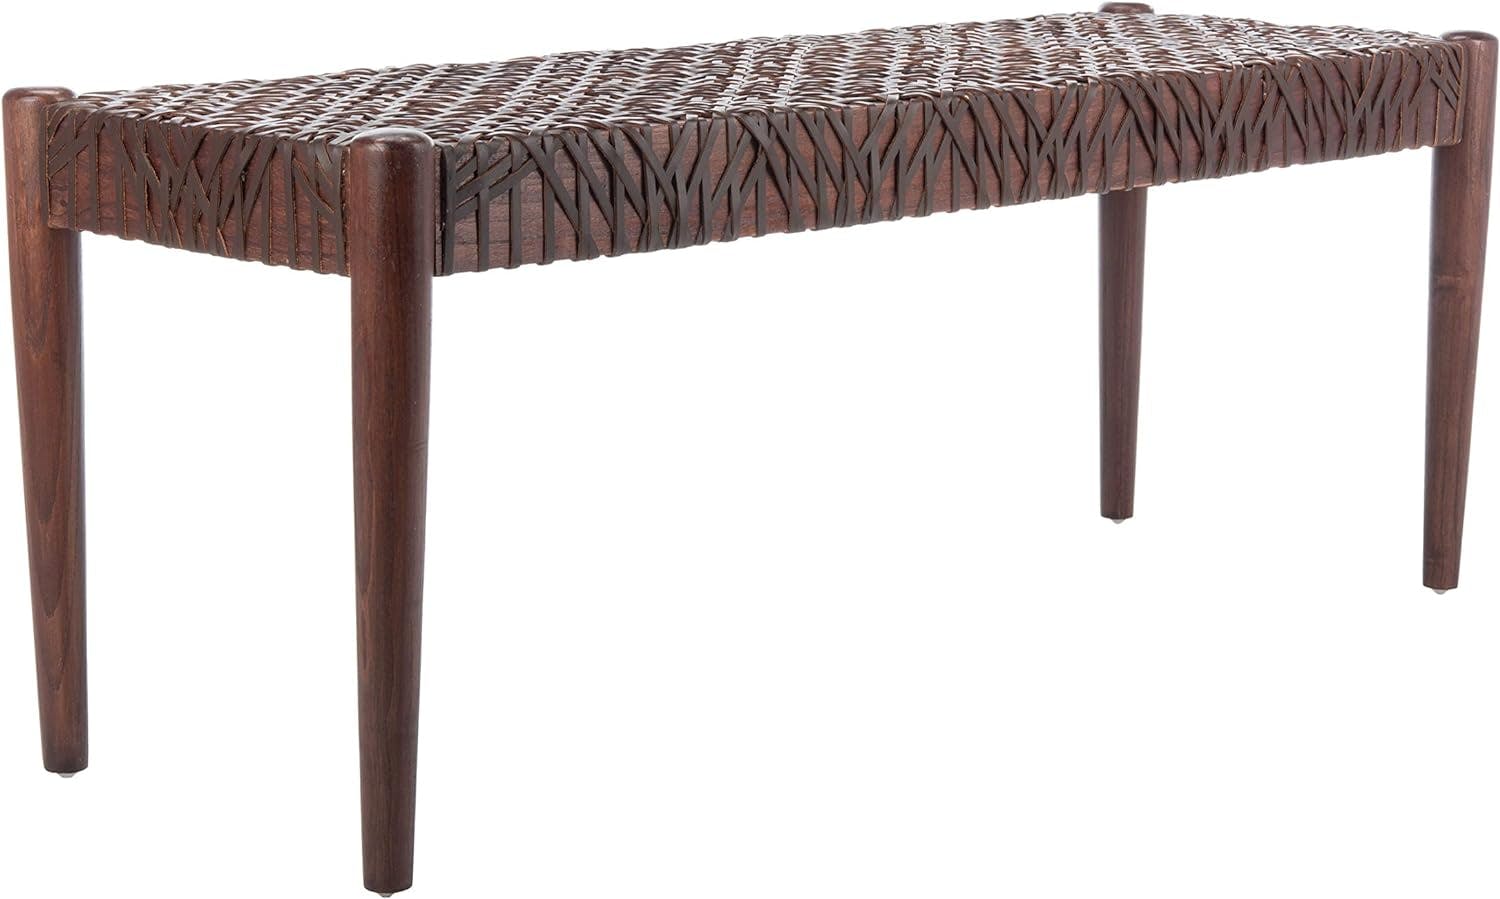 Transitional Brown Cowhide Leather Weave 47" Bench